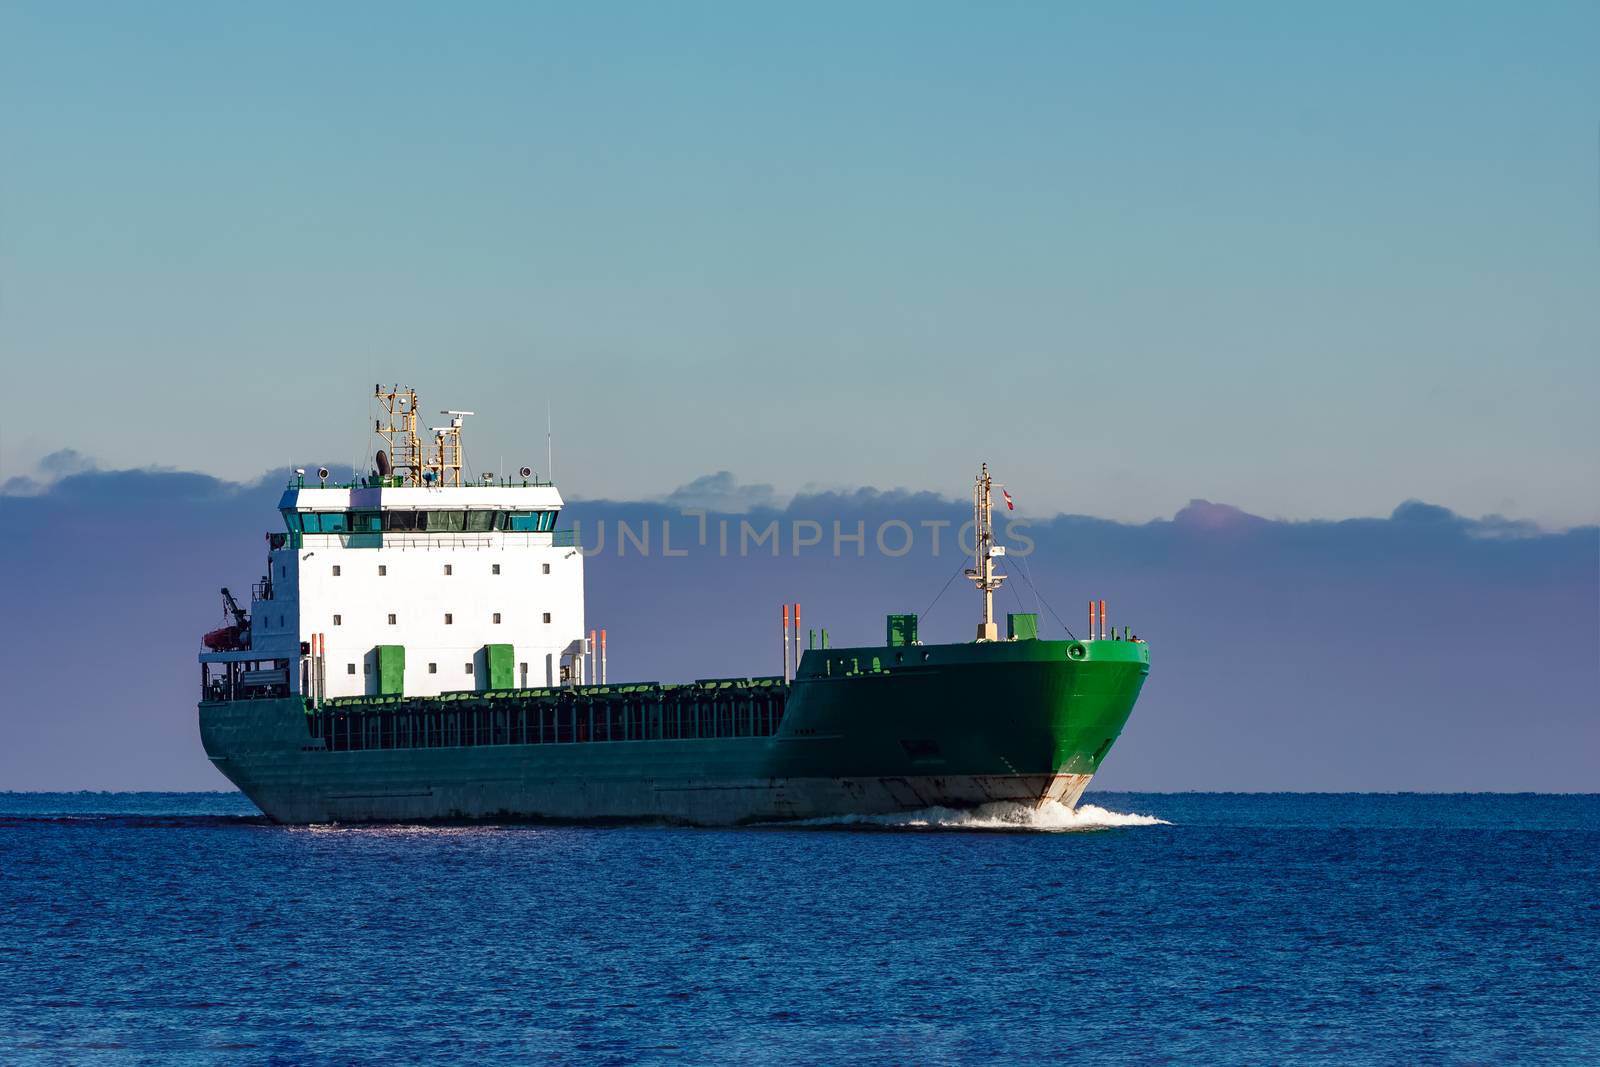 Green cargo ship moving in still water of Baltic sea